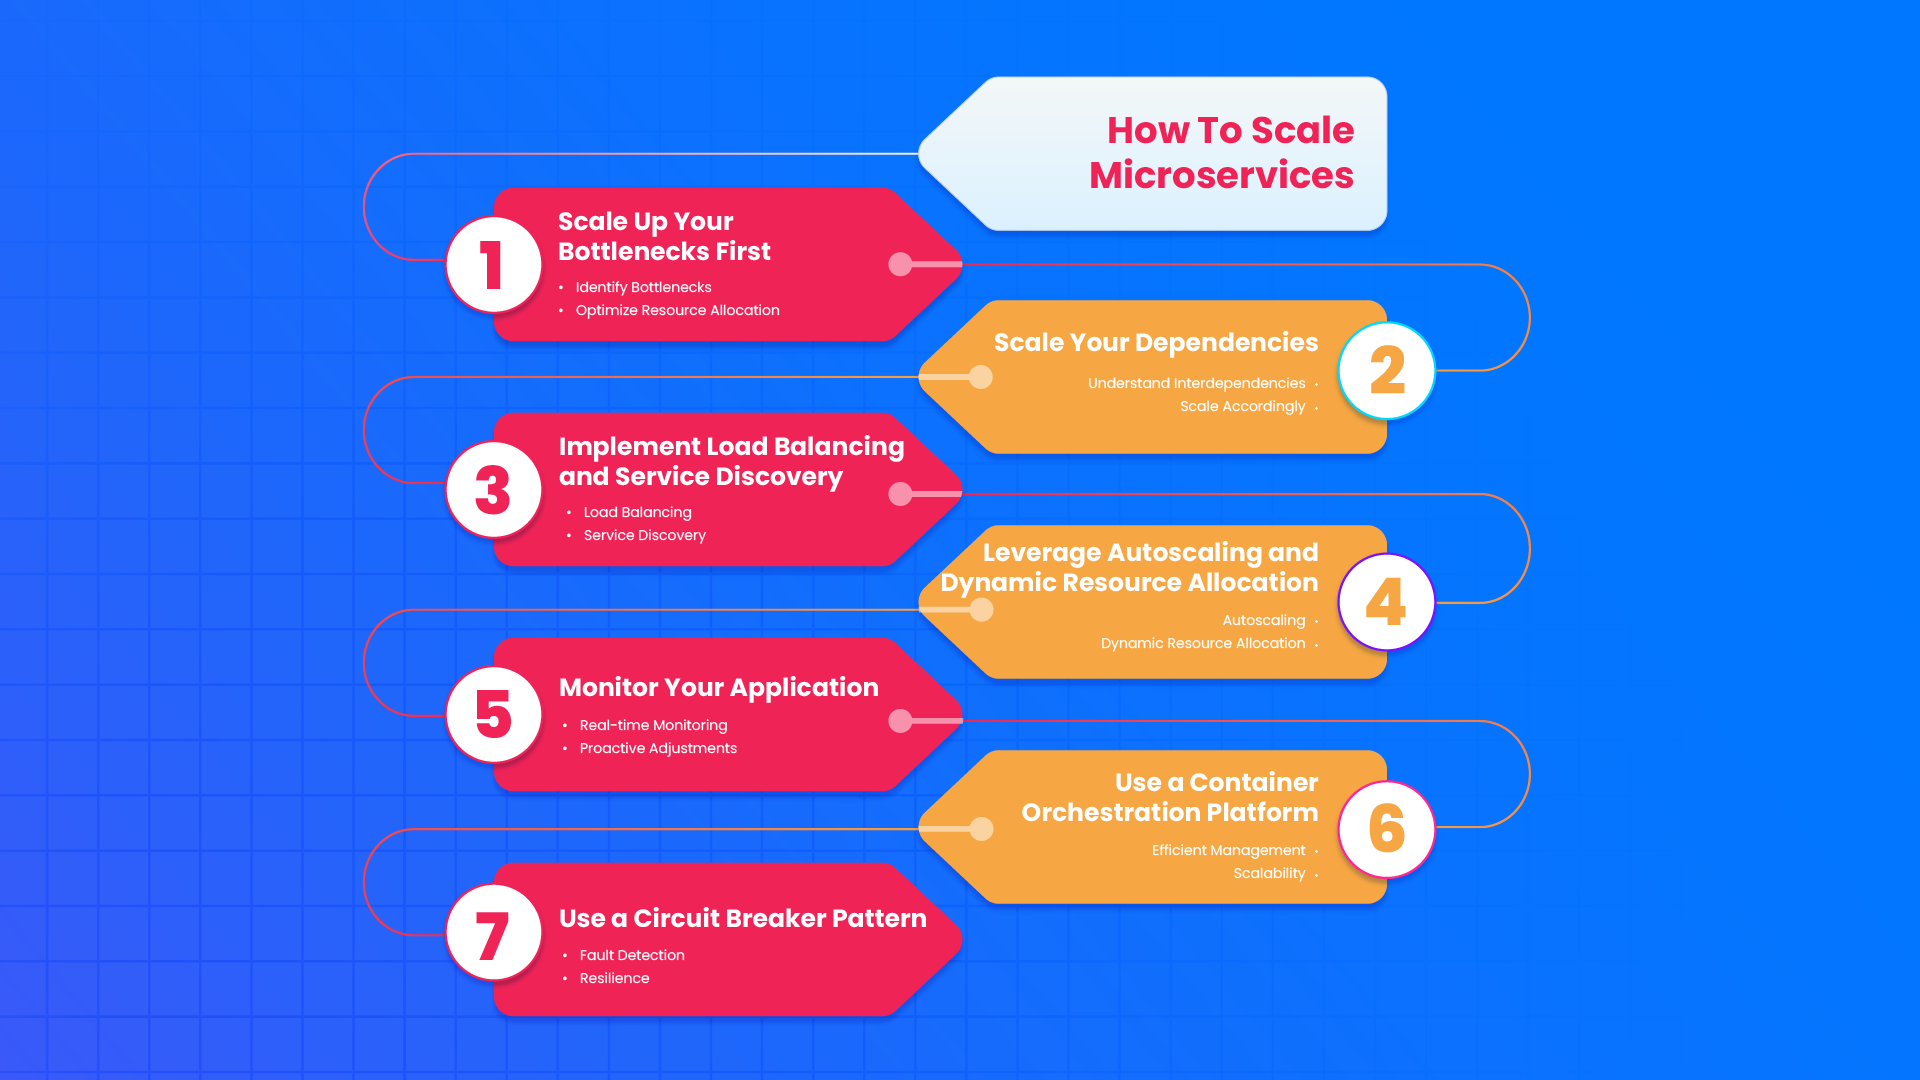 Approaches for scaling microservices